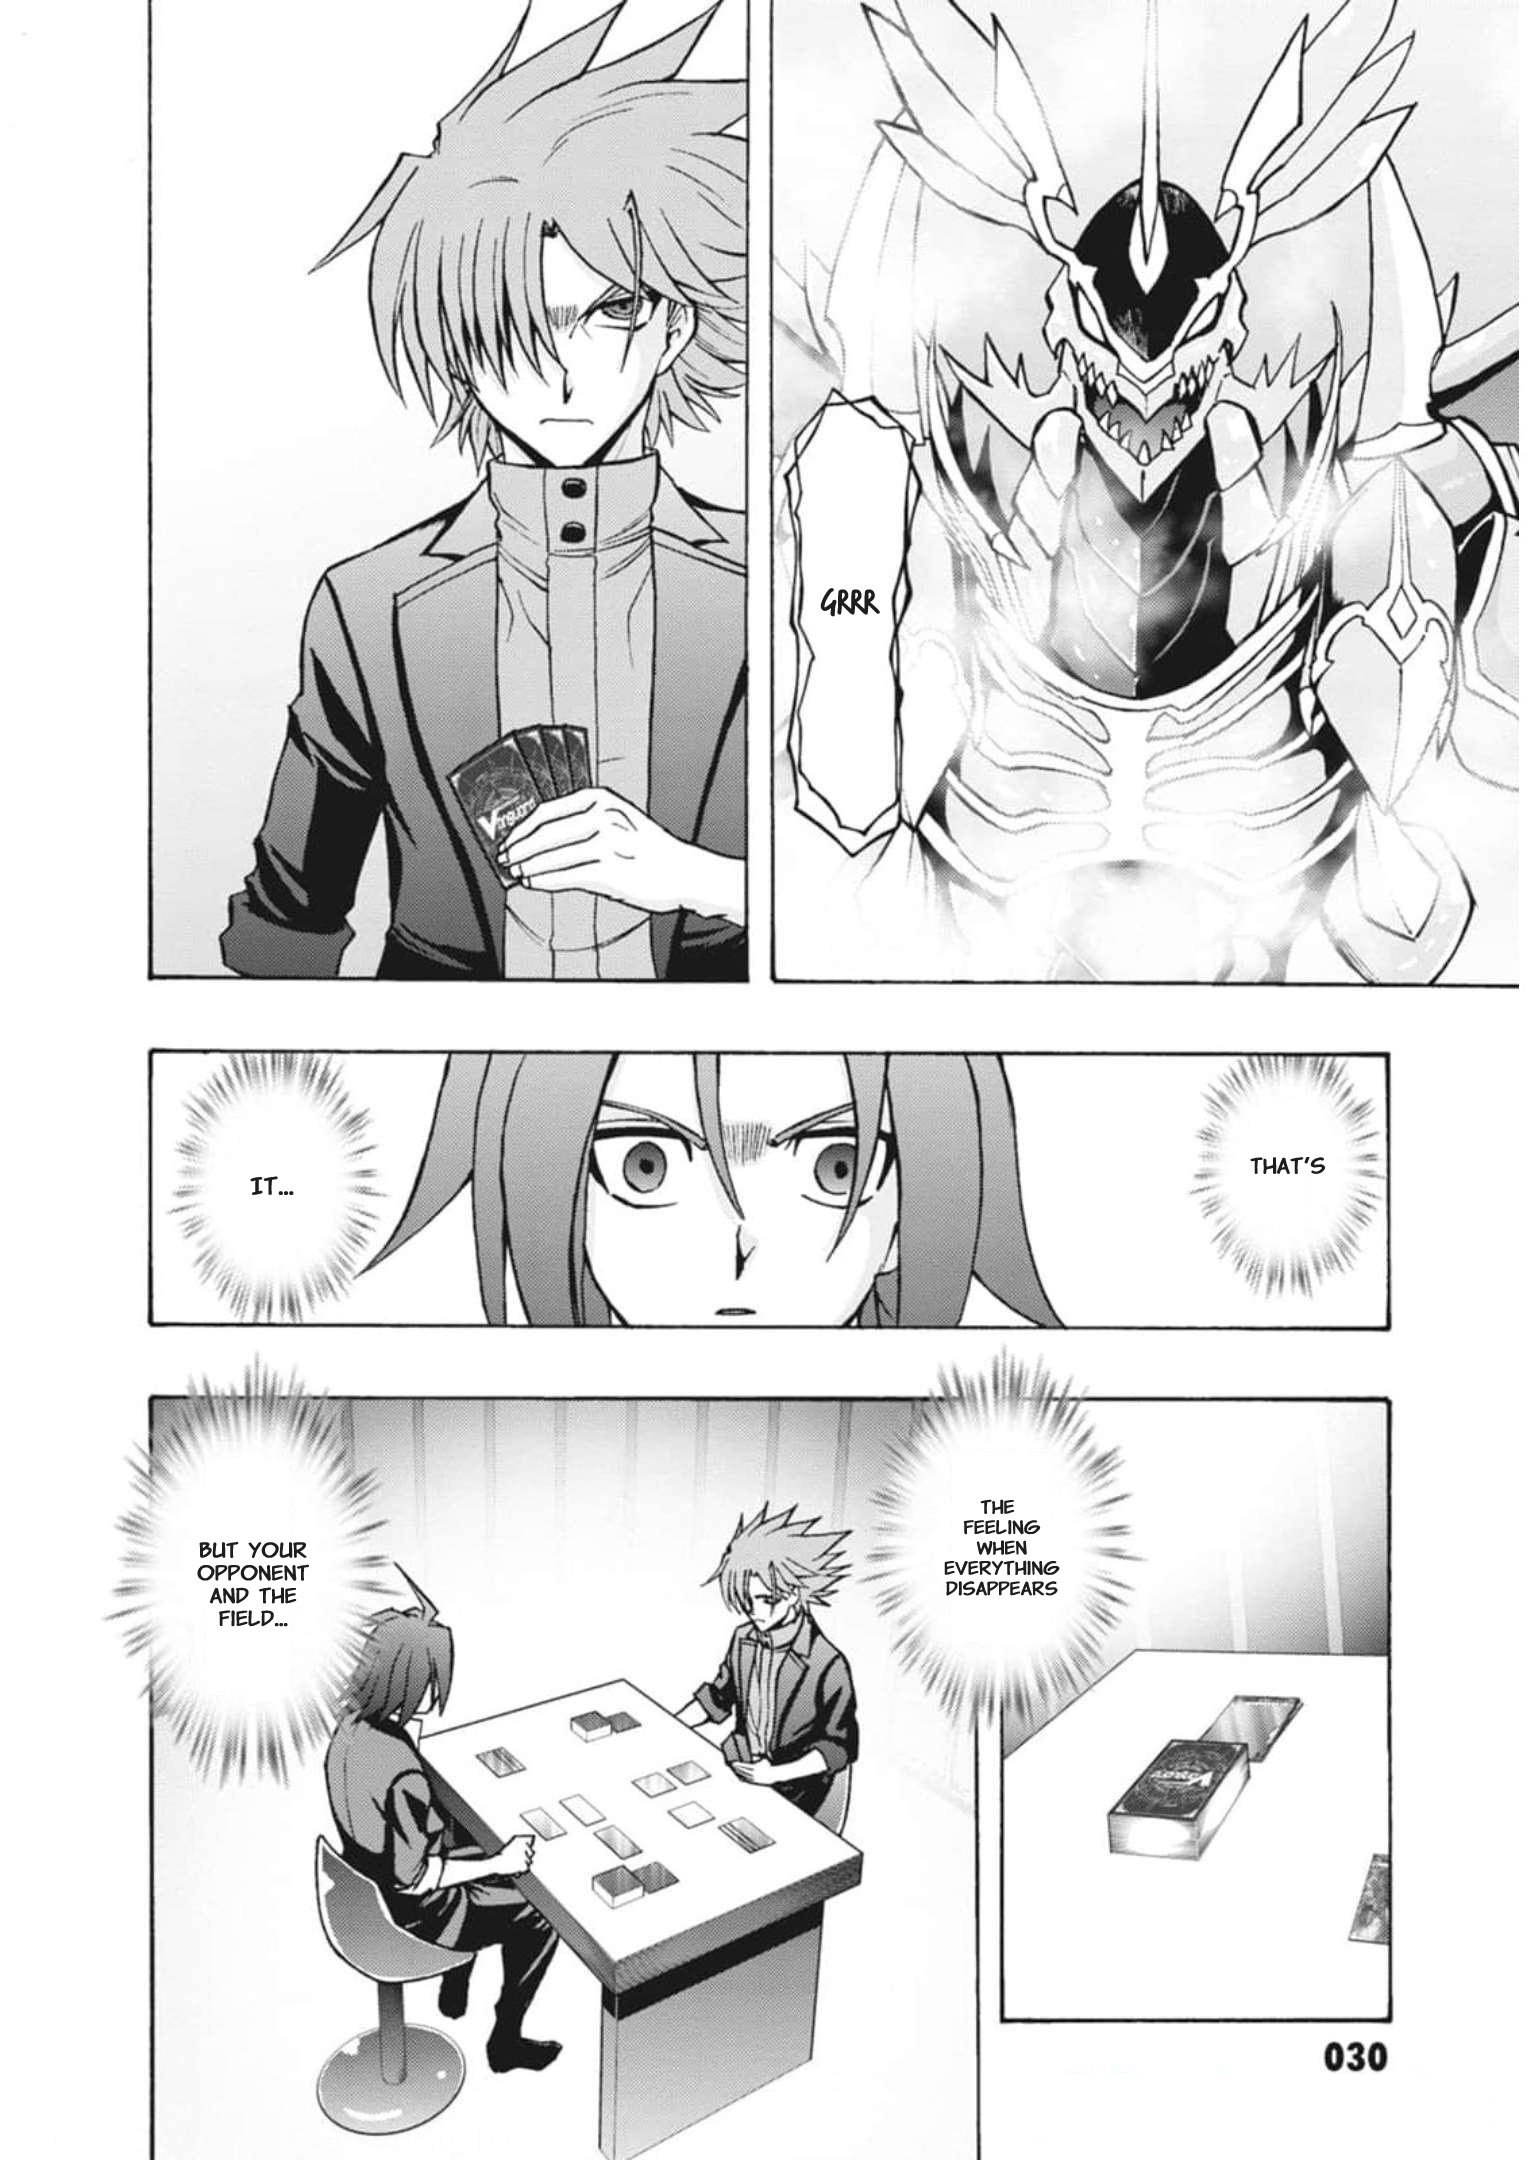 Cardfight!! Vanguard: Turnabout Chapter 9 #8